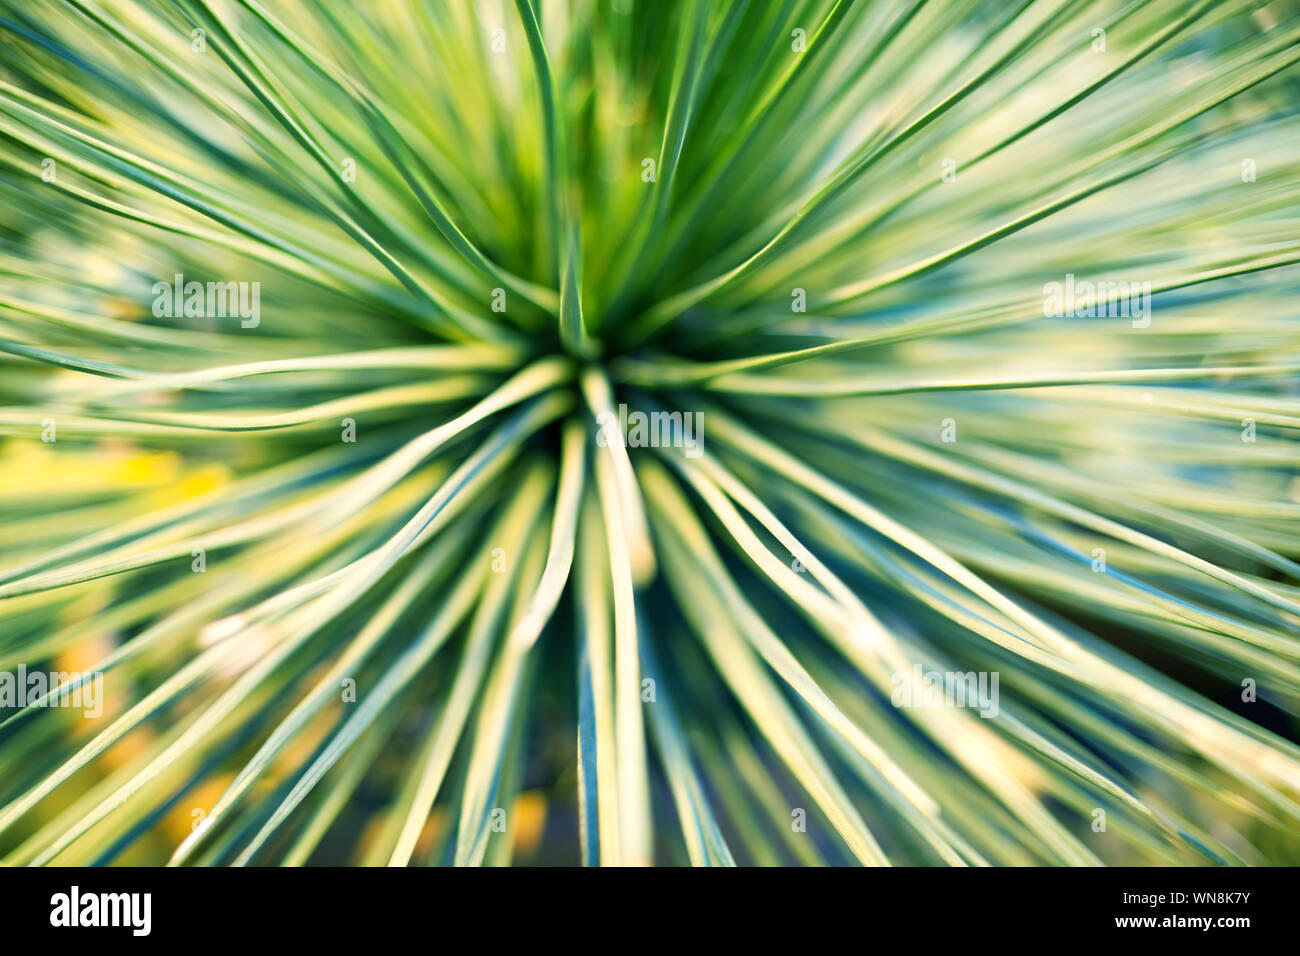 Bright green leaves of palm tree or ornamental houseplant blurred background close up macro Stock Photo